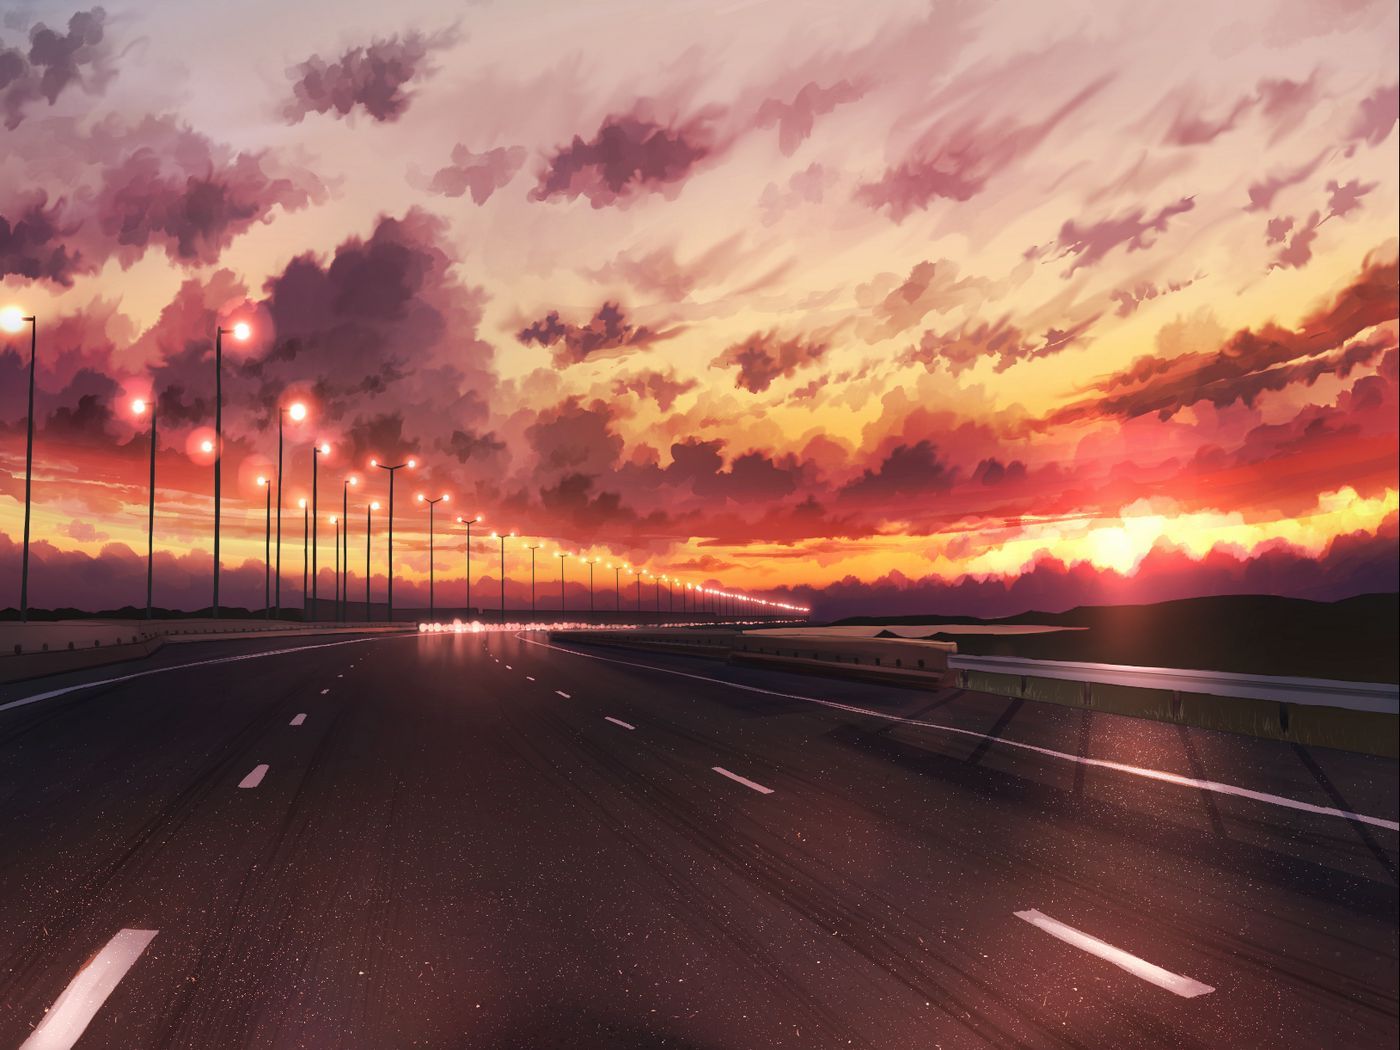 An artistic painting of a road at sunset - Anime sunset